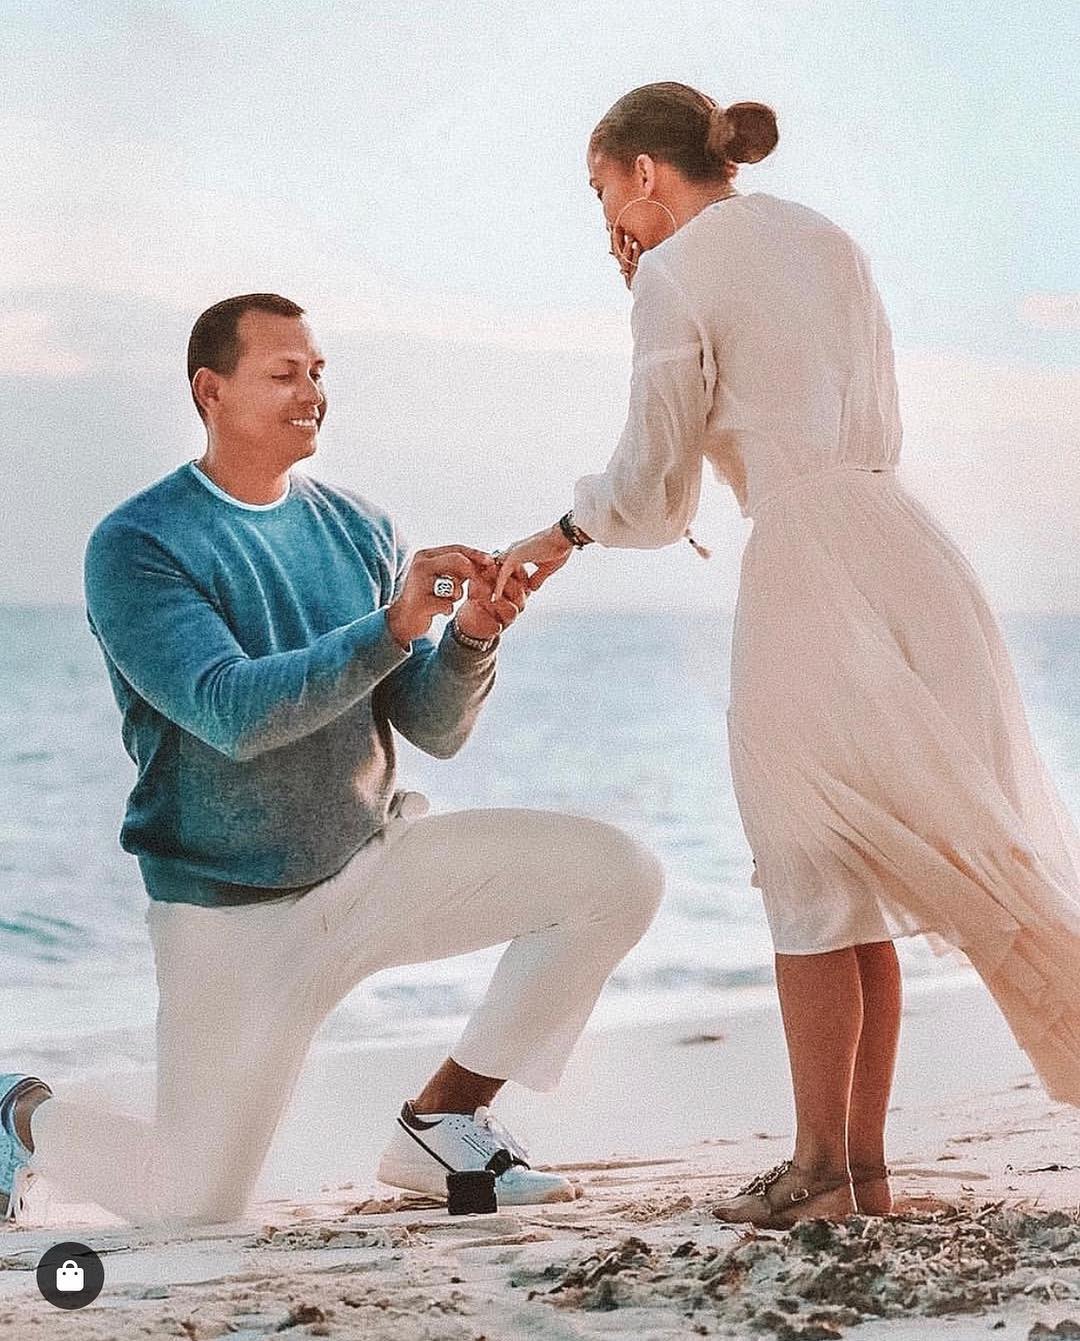 Congratulations to JLO and AROD